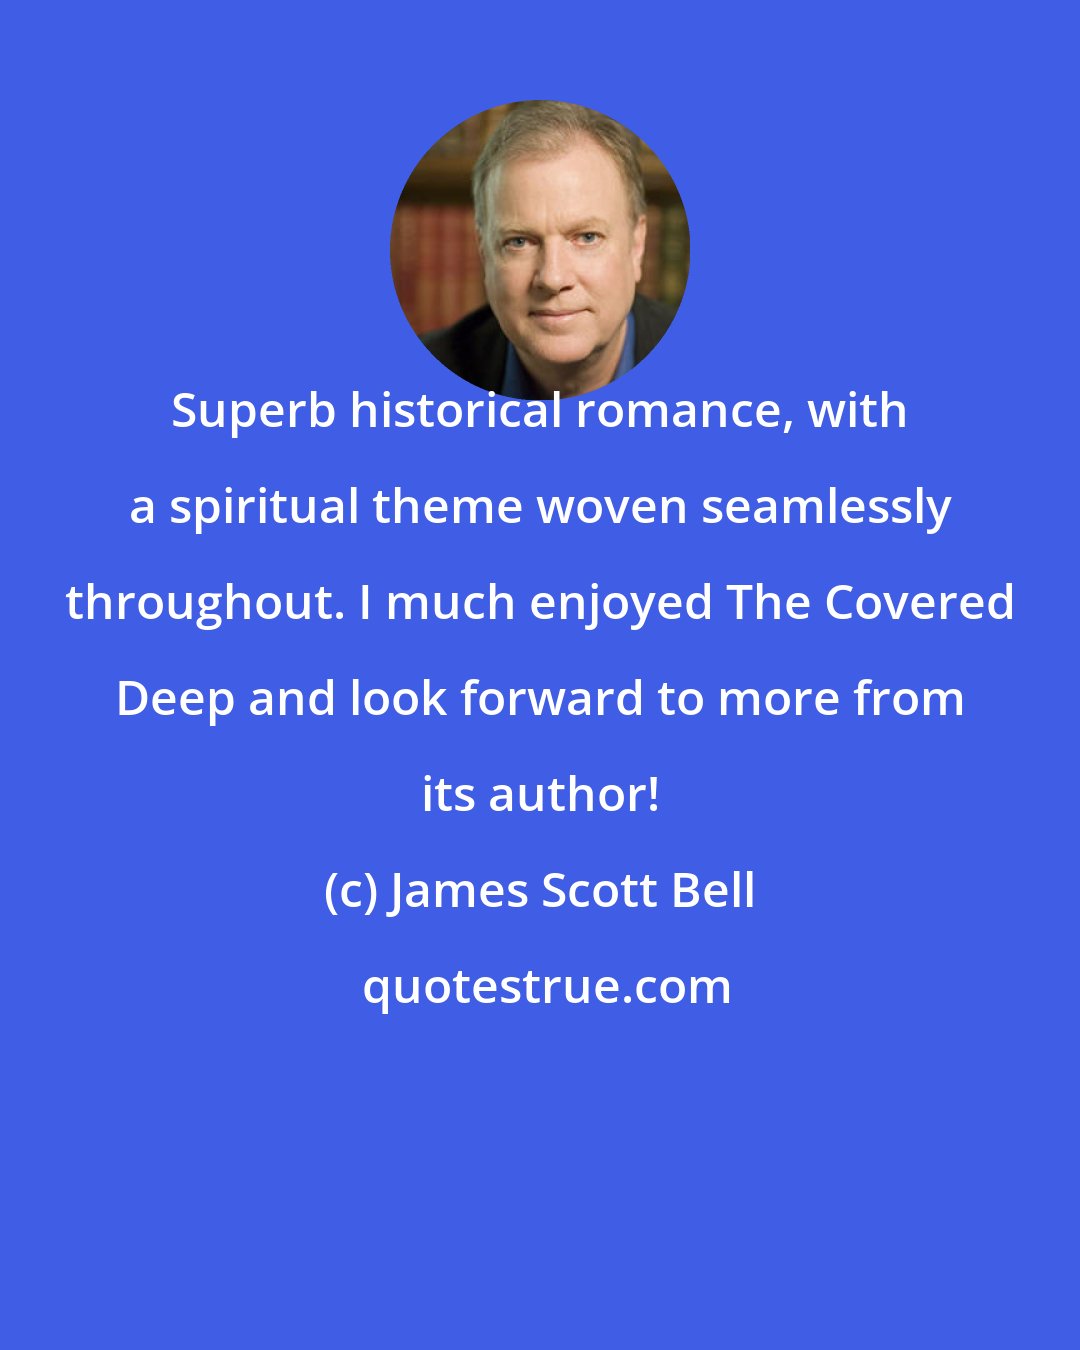 James Scott Bell: Superb historical romance, with a spiritual theme woven seamlessly throughout. I much enjoyed The Covered Deep and look forward to more from its author!